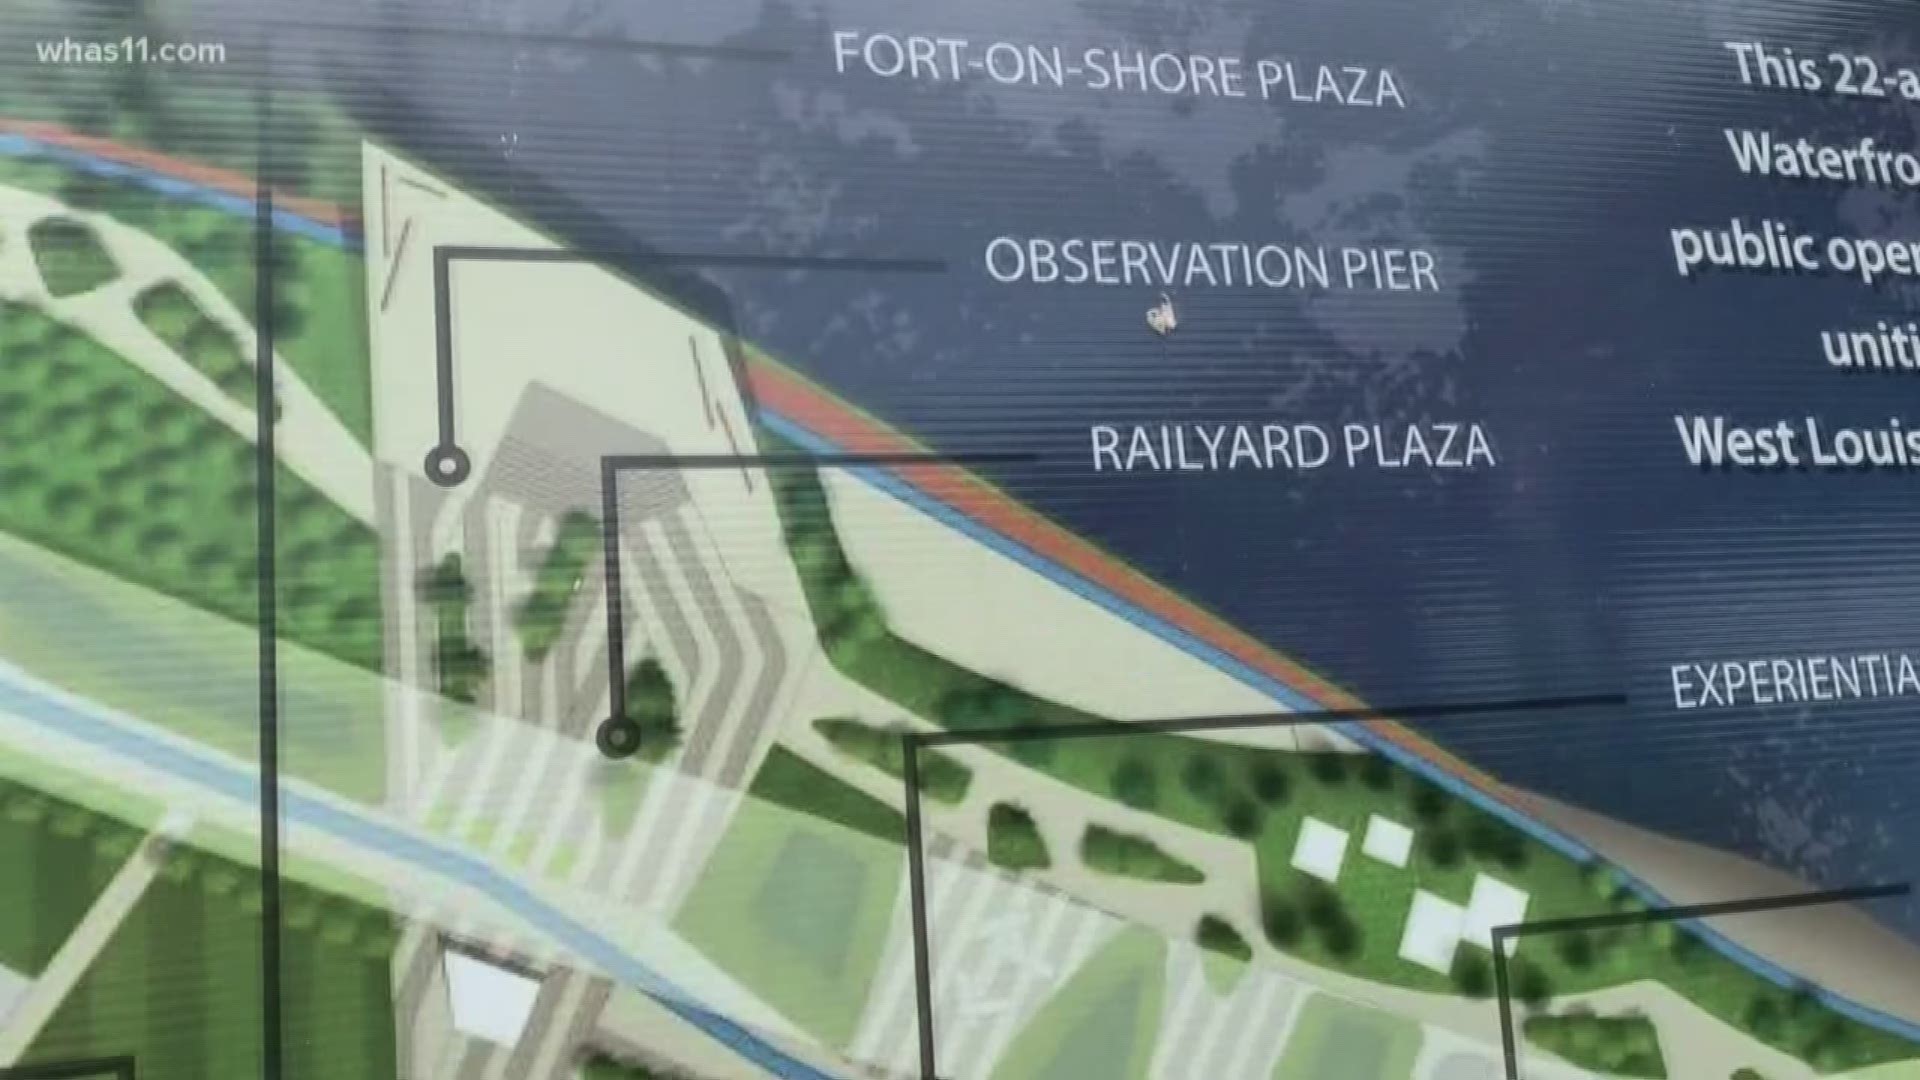 One of the popular attractions getting hit by Mayor Fischer's proposed budget cuts is the Waterfront Development Corporation. It comes as Waterfront Park is expanding westward. What will now happen with the park's expansion?